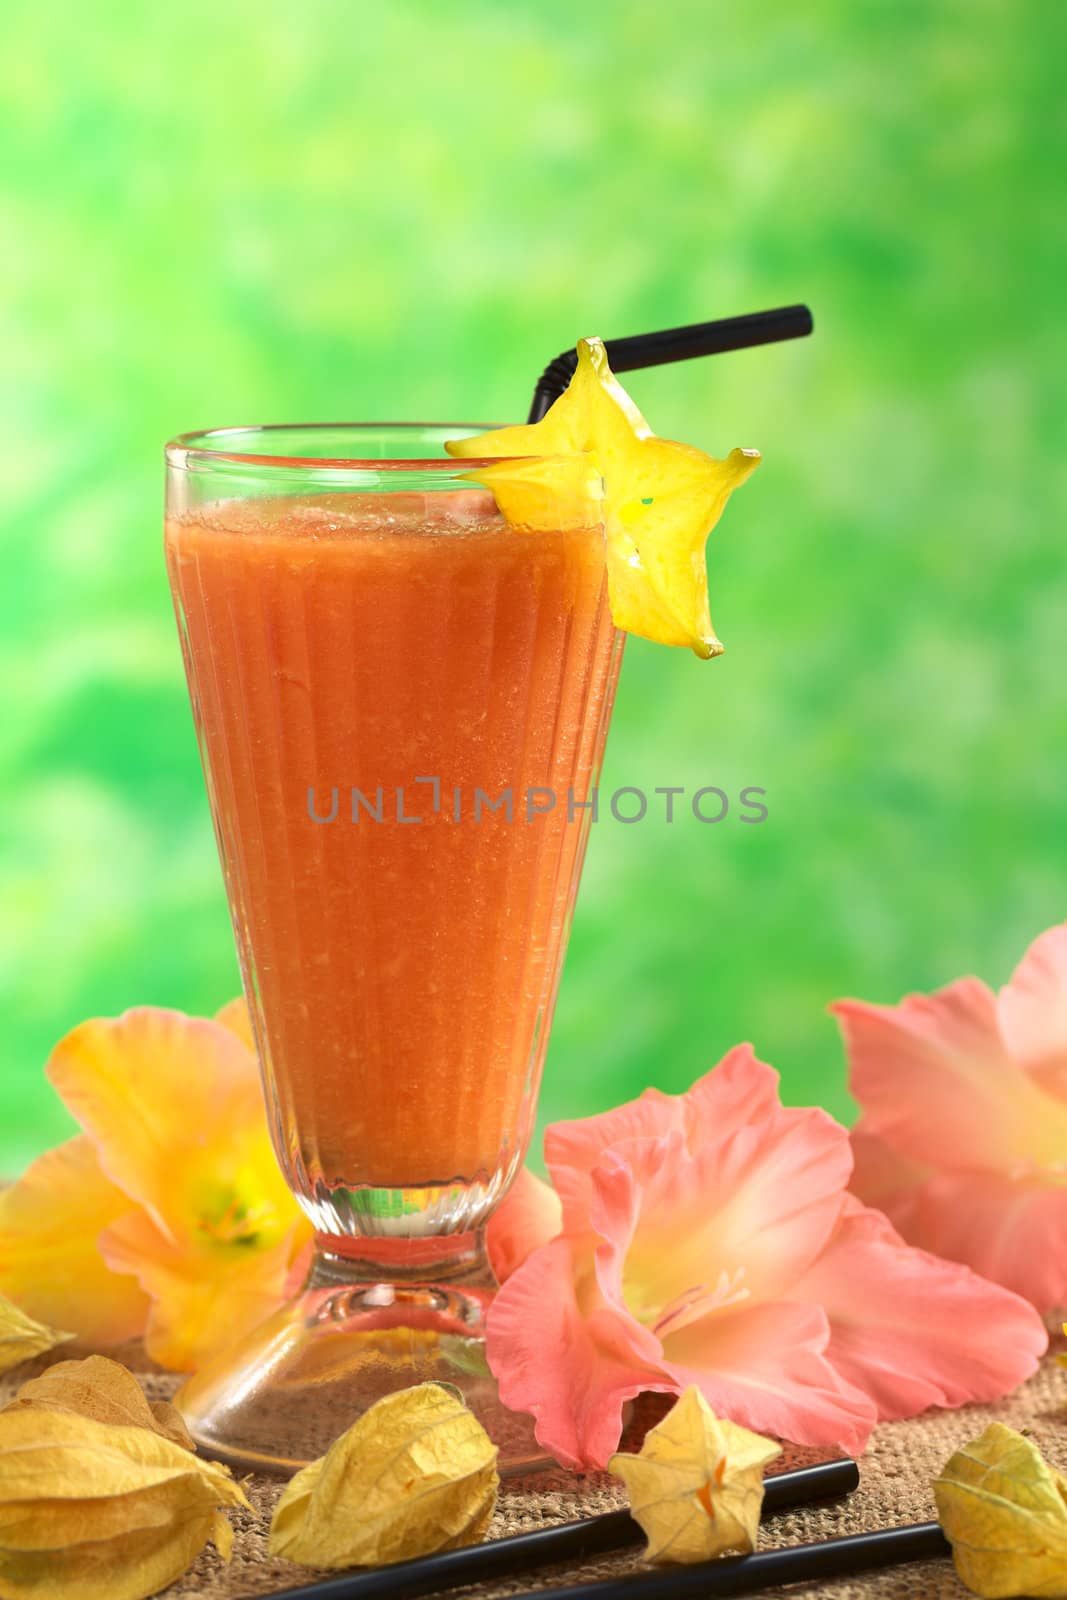 Fresh papaya juice garnished with a carambola slice (Selective Focus, Focus on the carambola and the upper part of the glass)